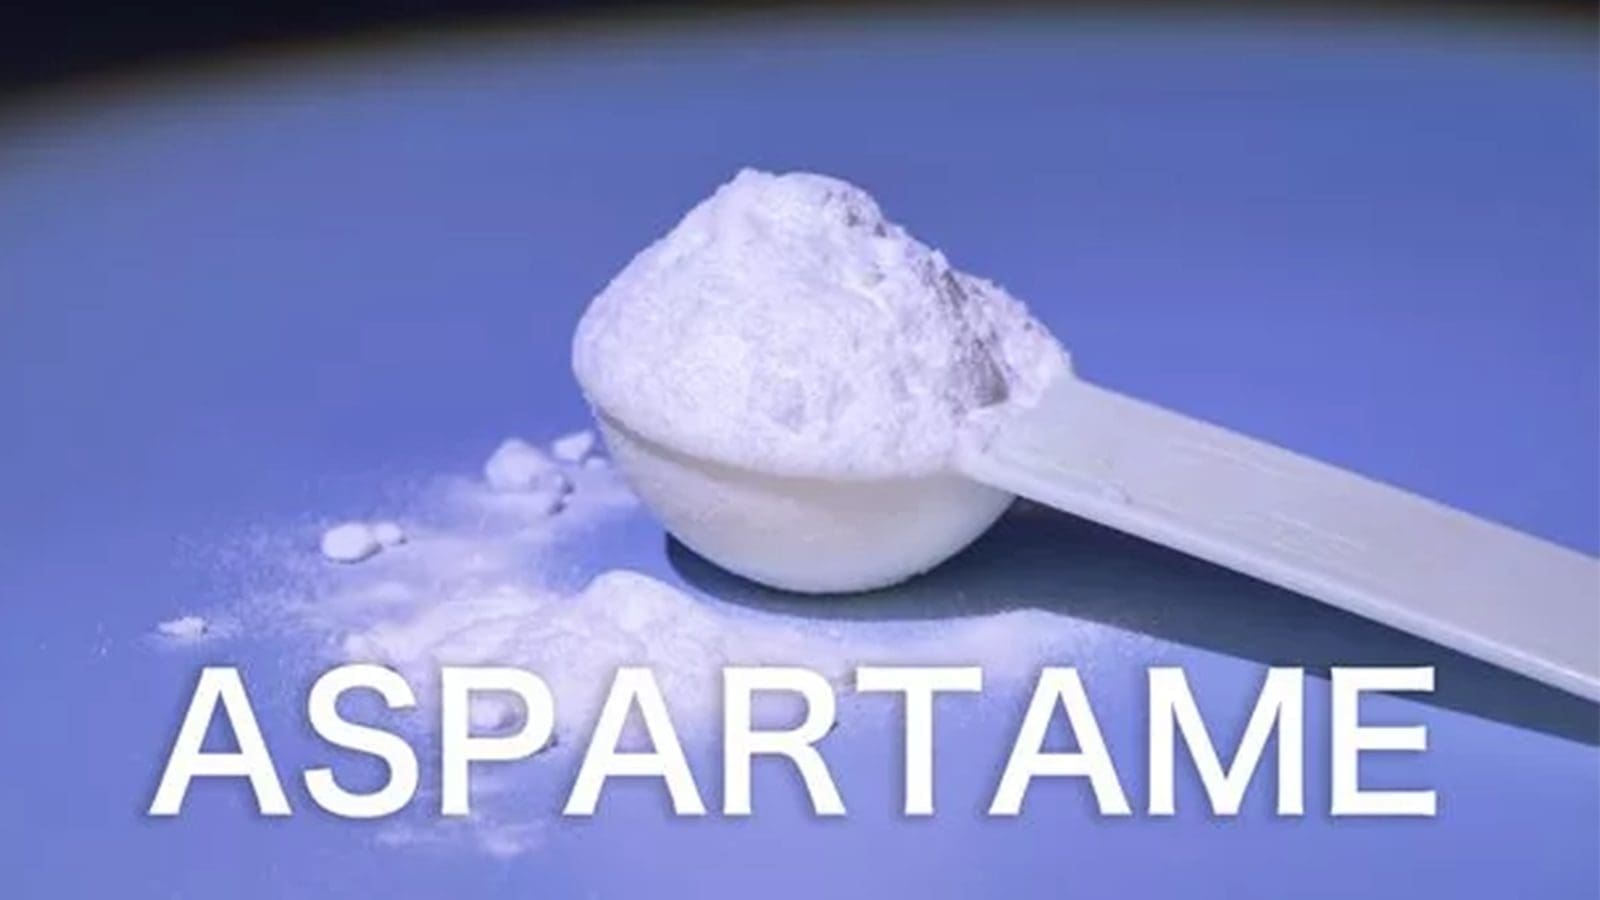 Artificial sweetener aspartame linked to cognitive deficits in new study